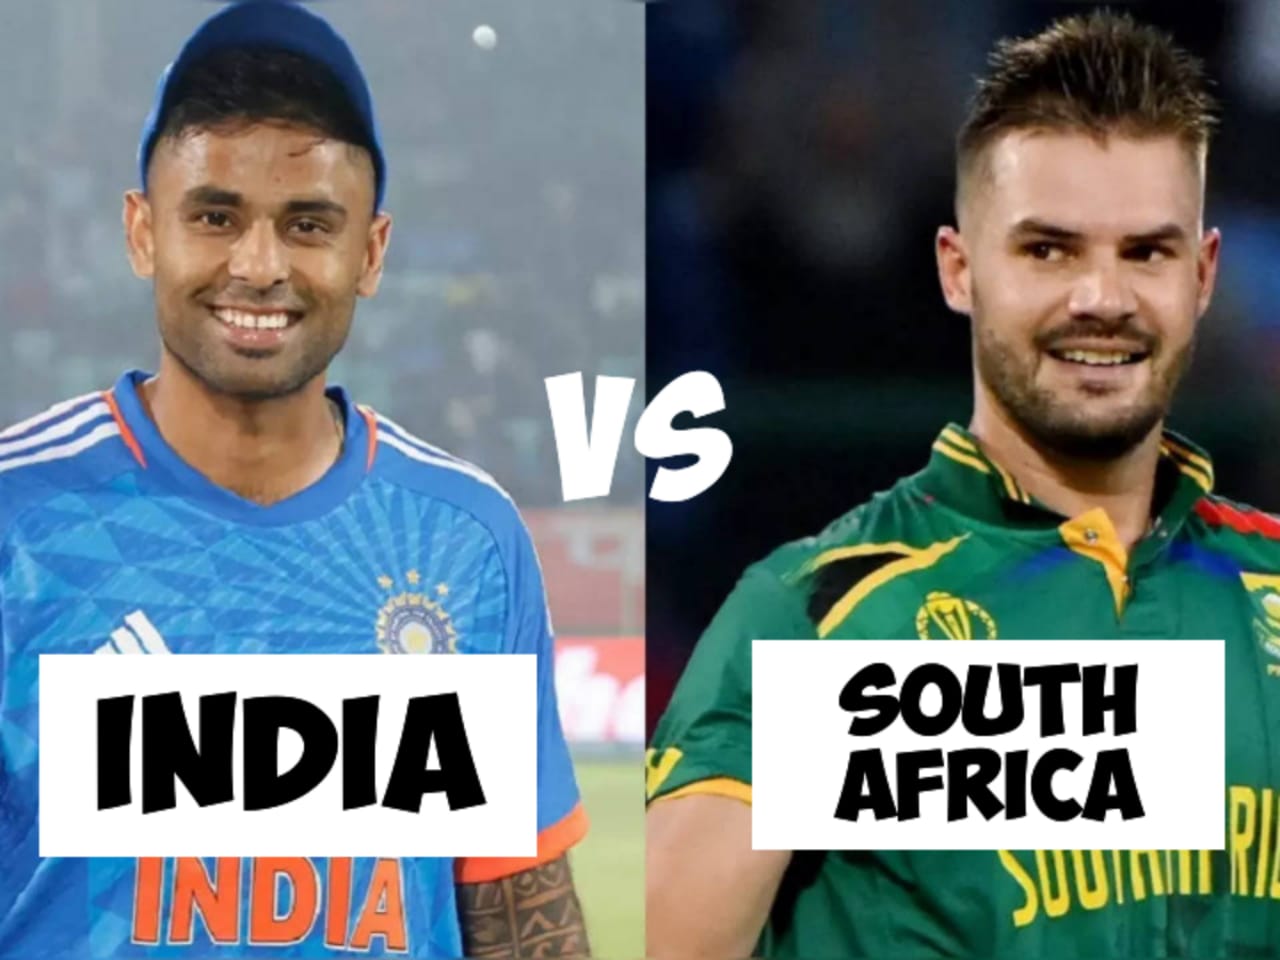 wanderers whirlwind: India claims crushing victory in 1st ODI against south africa